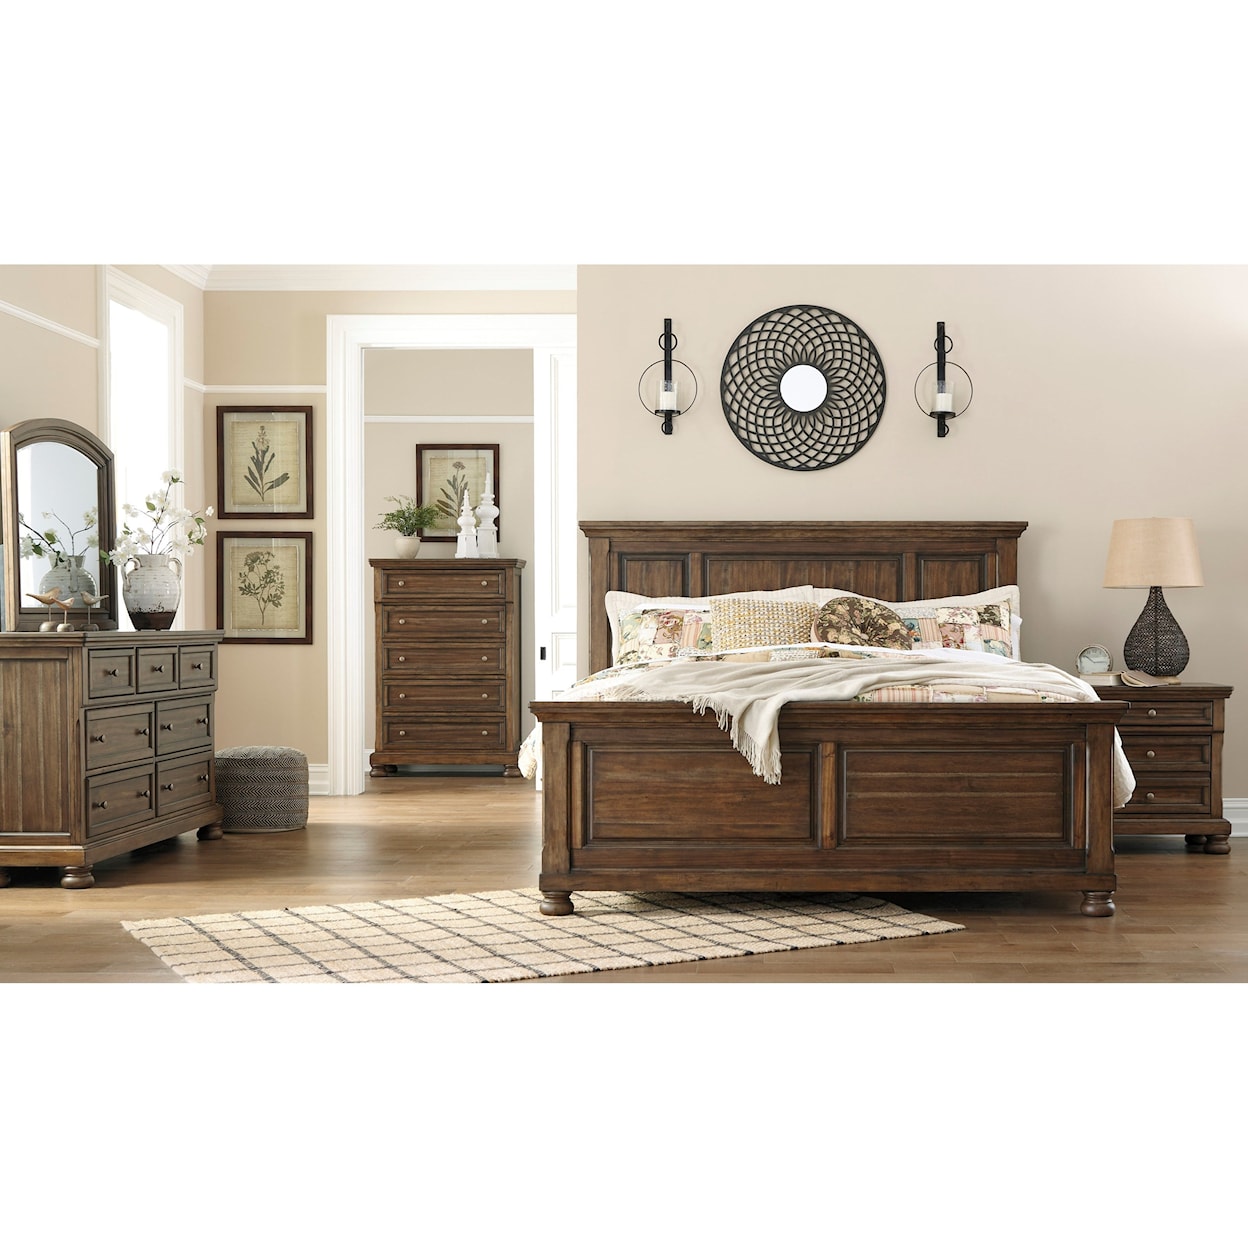 Signature Design by Ashley Flynnter Queen Bedroom Group